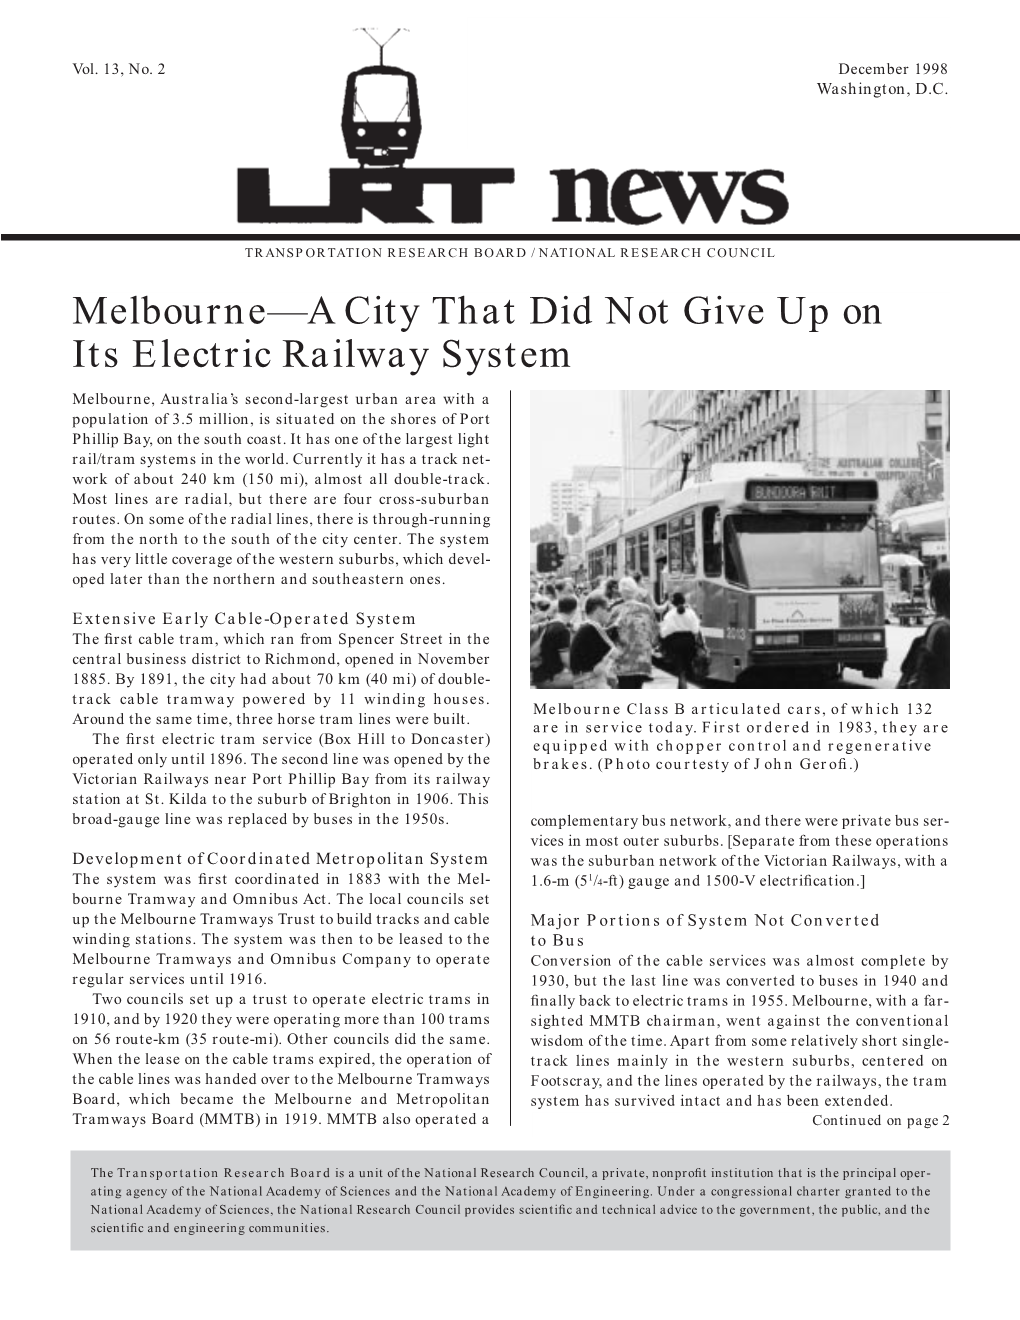 Melbourne—A City That Did Not Give up on Its Electric Railway System